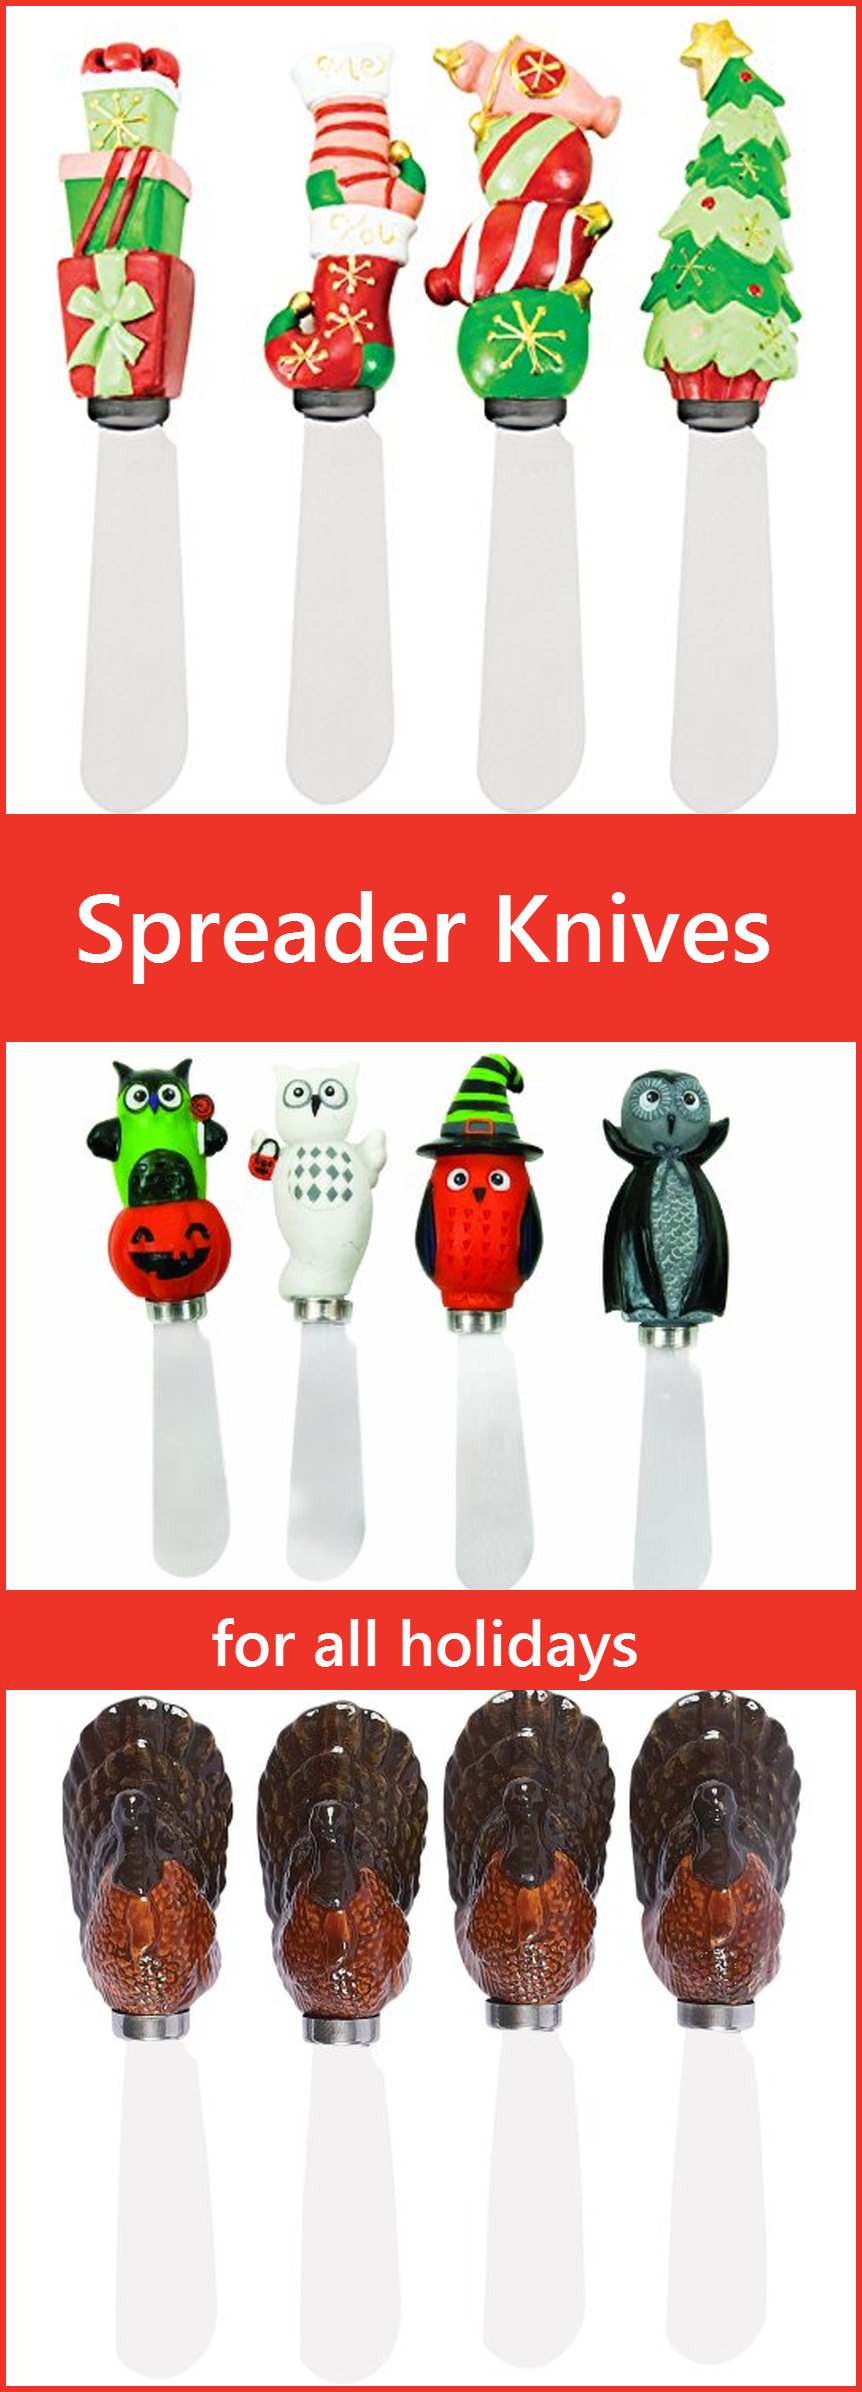 Butter Spreaders Cheese Knife Sets - Unique and fun for all holidays, parties, and more. Great gift idea.